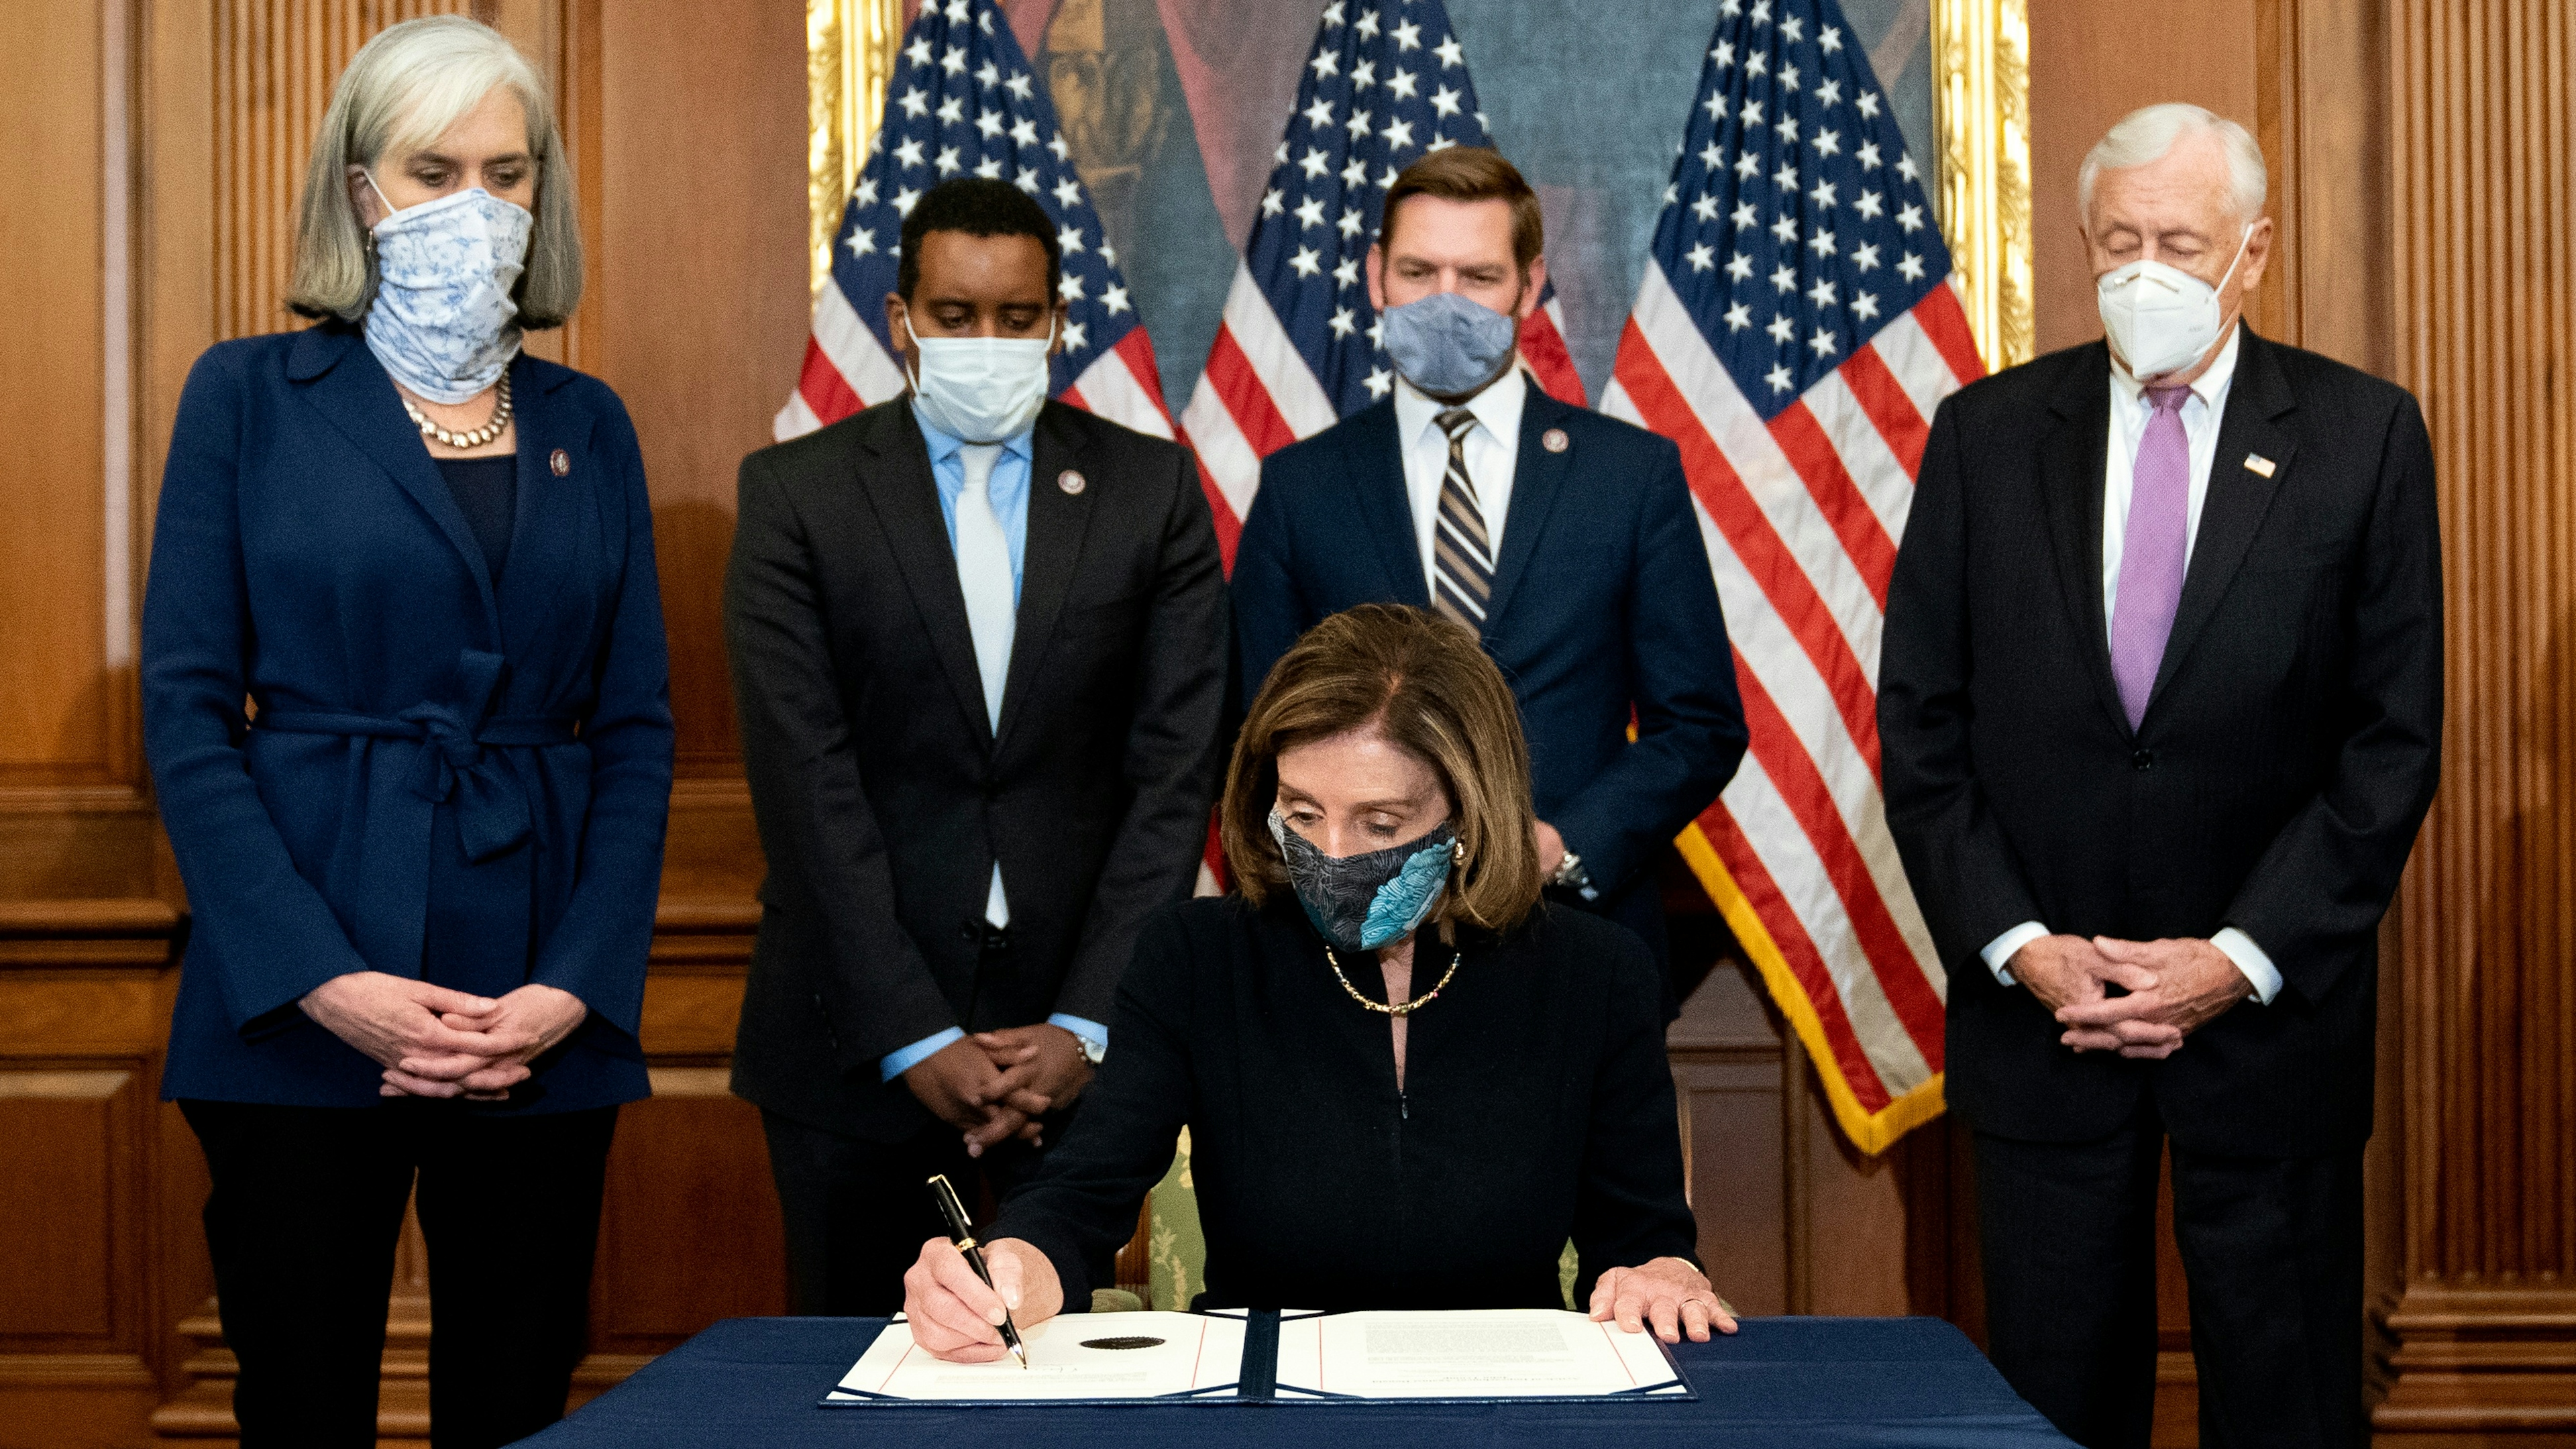 Speaker of the House Nancy Pelosi (D-CA) signs an article of impeachment against President Donald Trump at the U.S. Capitol on January 13, 2021.